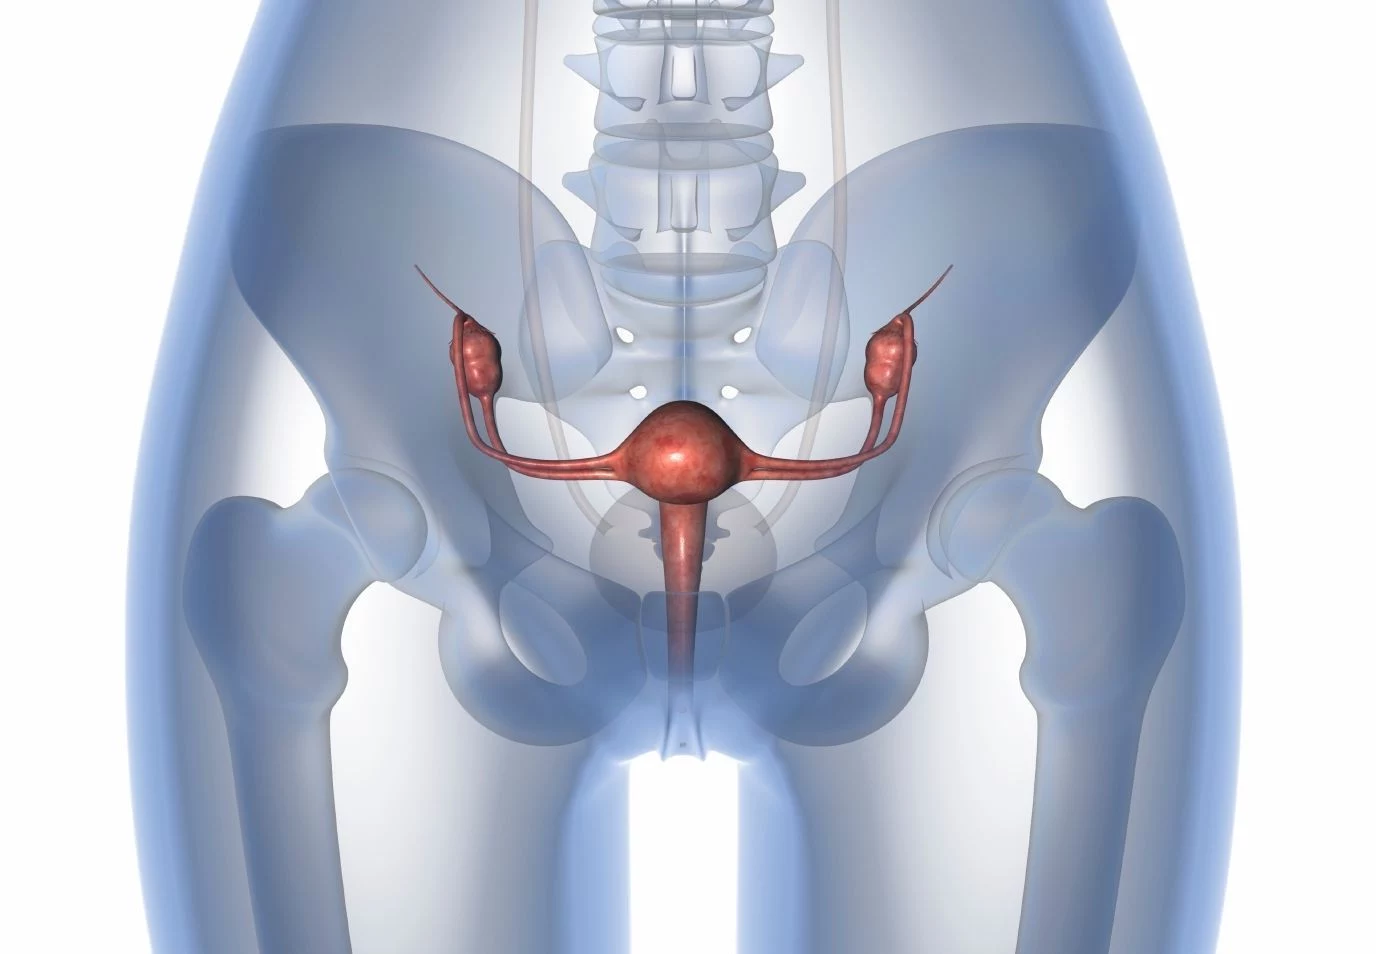 The phase 3 SIENDO study, which is evaluating maintenance selinexor in endometrial cancer, has been recommended by the Data and Safety Monitoring Board to continue as previously planned without the need to add additional patients to the trial or amend the study protocol, following a prespecified interim futility analysis. 